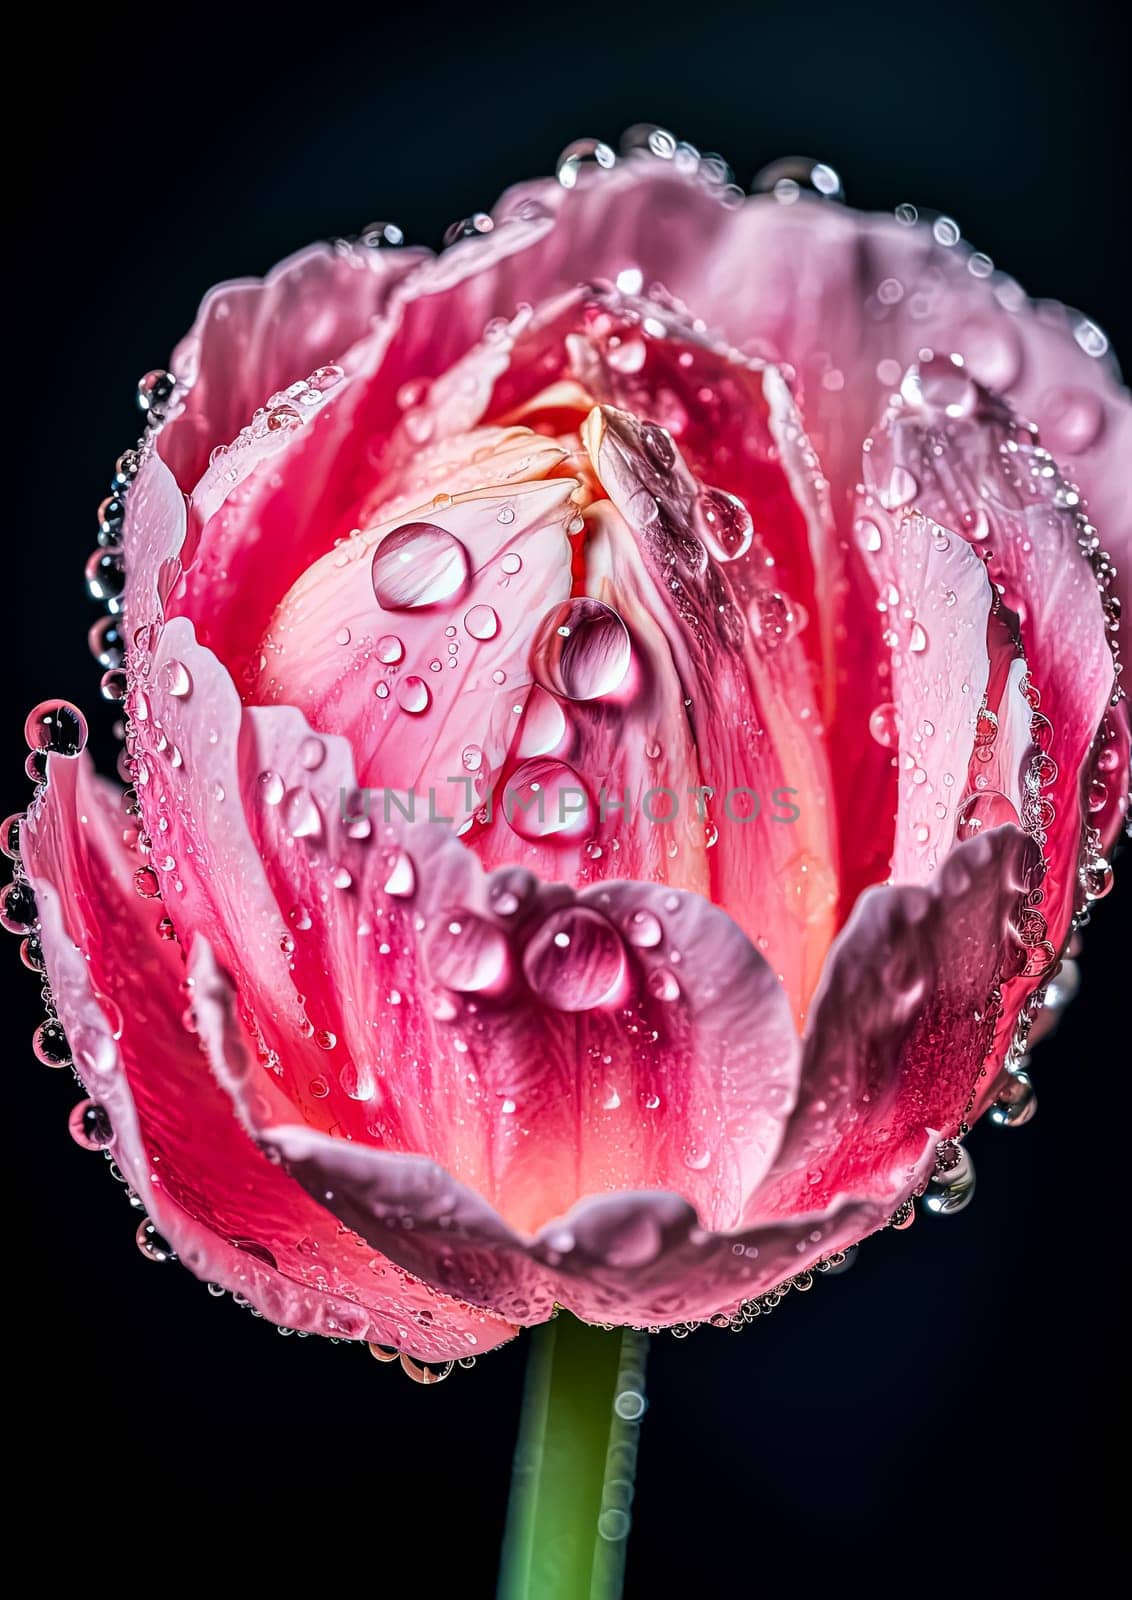 A beautiful pink flower with droplets of water on it. The droplets are small and scattered, giving the flower a delicate and serene appearance